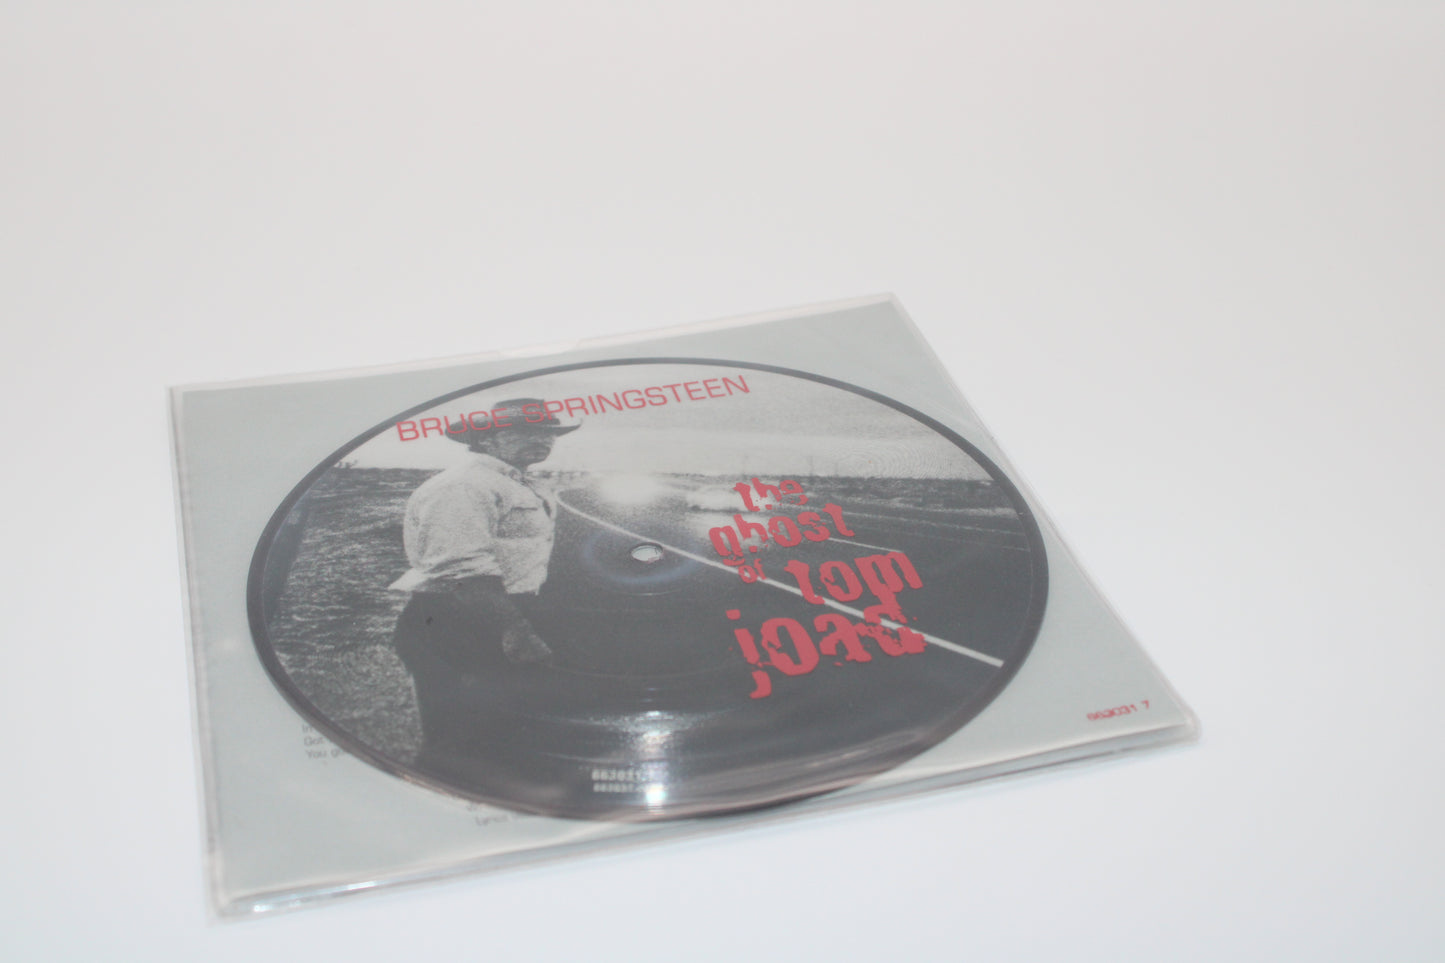 Bruce Springsteen 7" Picture Disc Vinyl Collectible Ltd. Ed. & Numbered - Ghost of Tom Joad